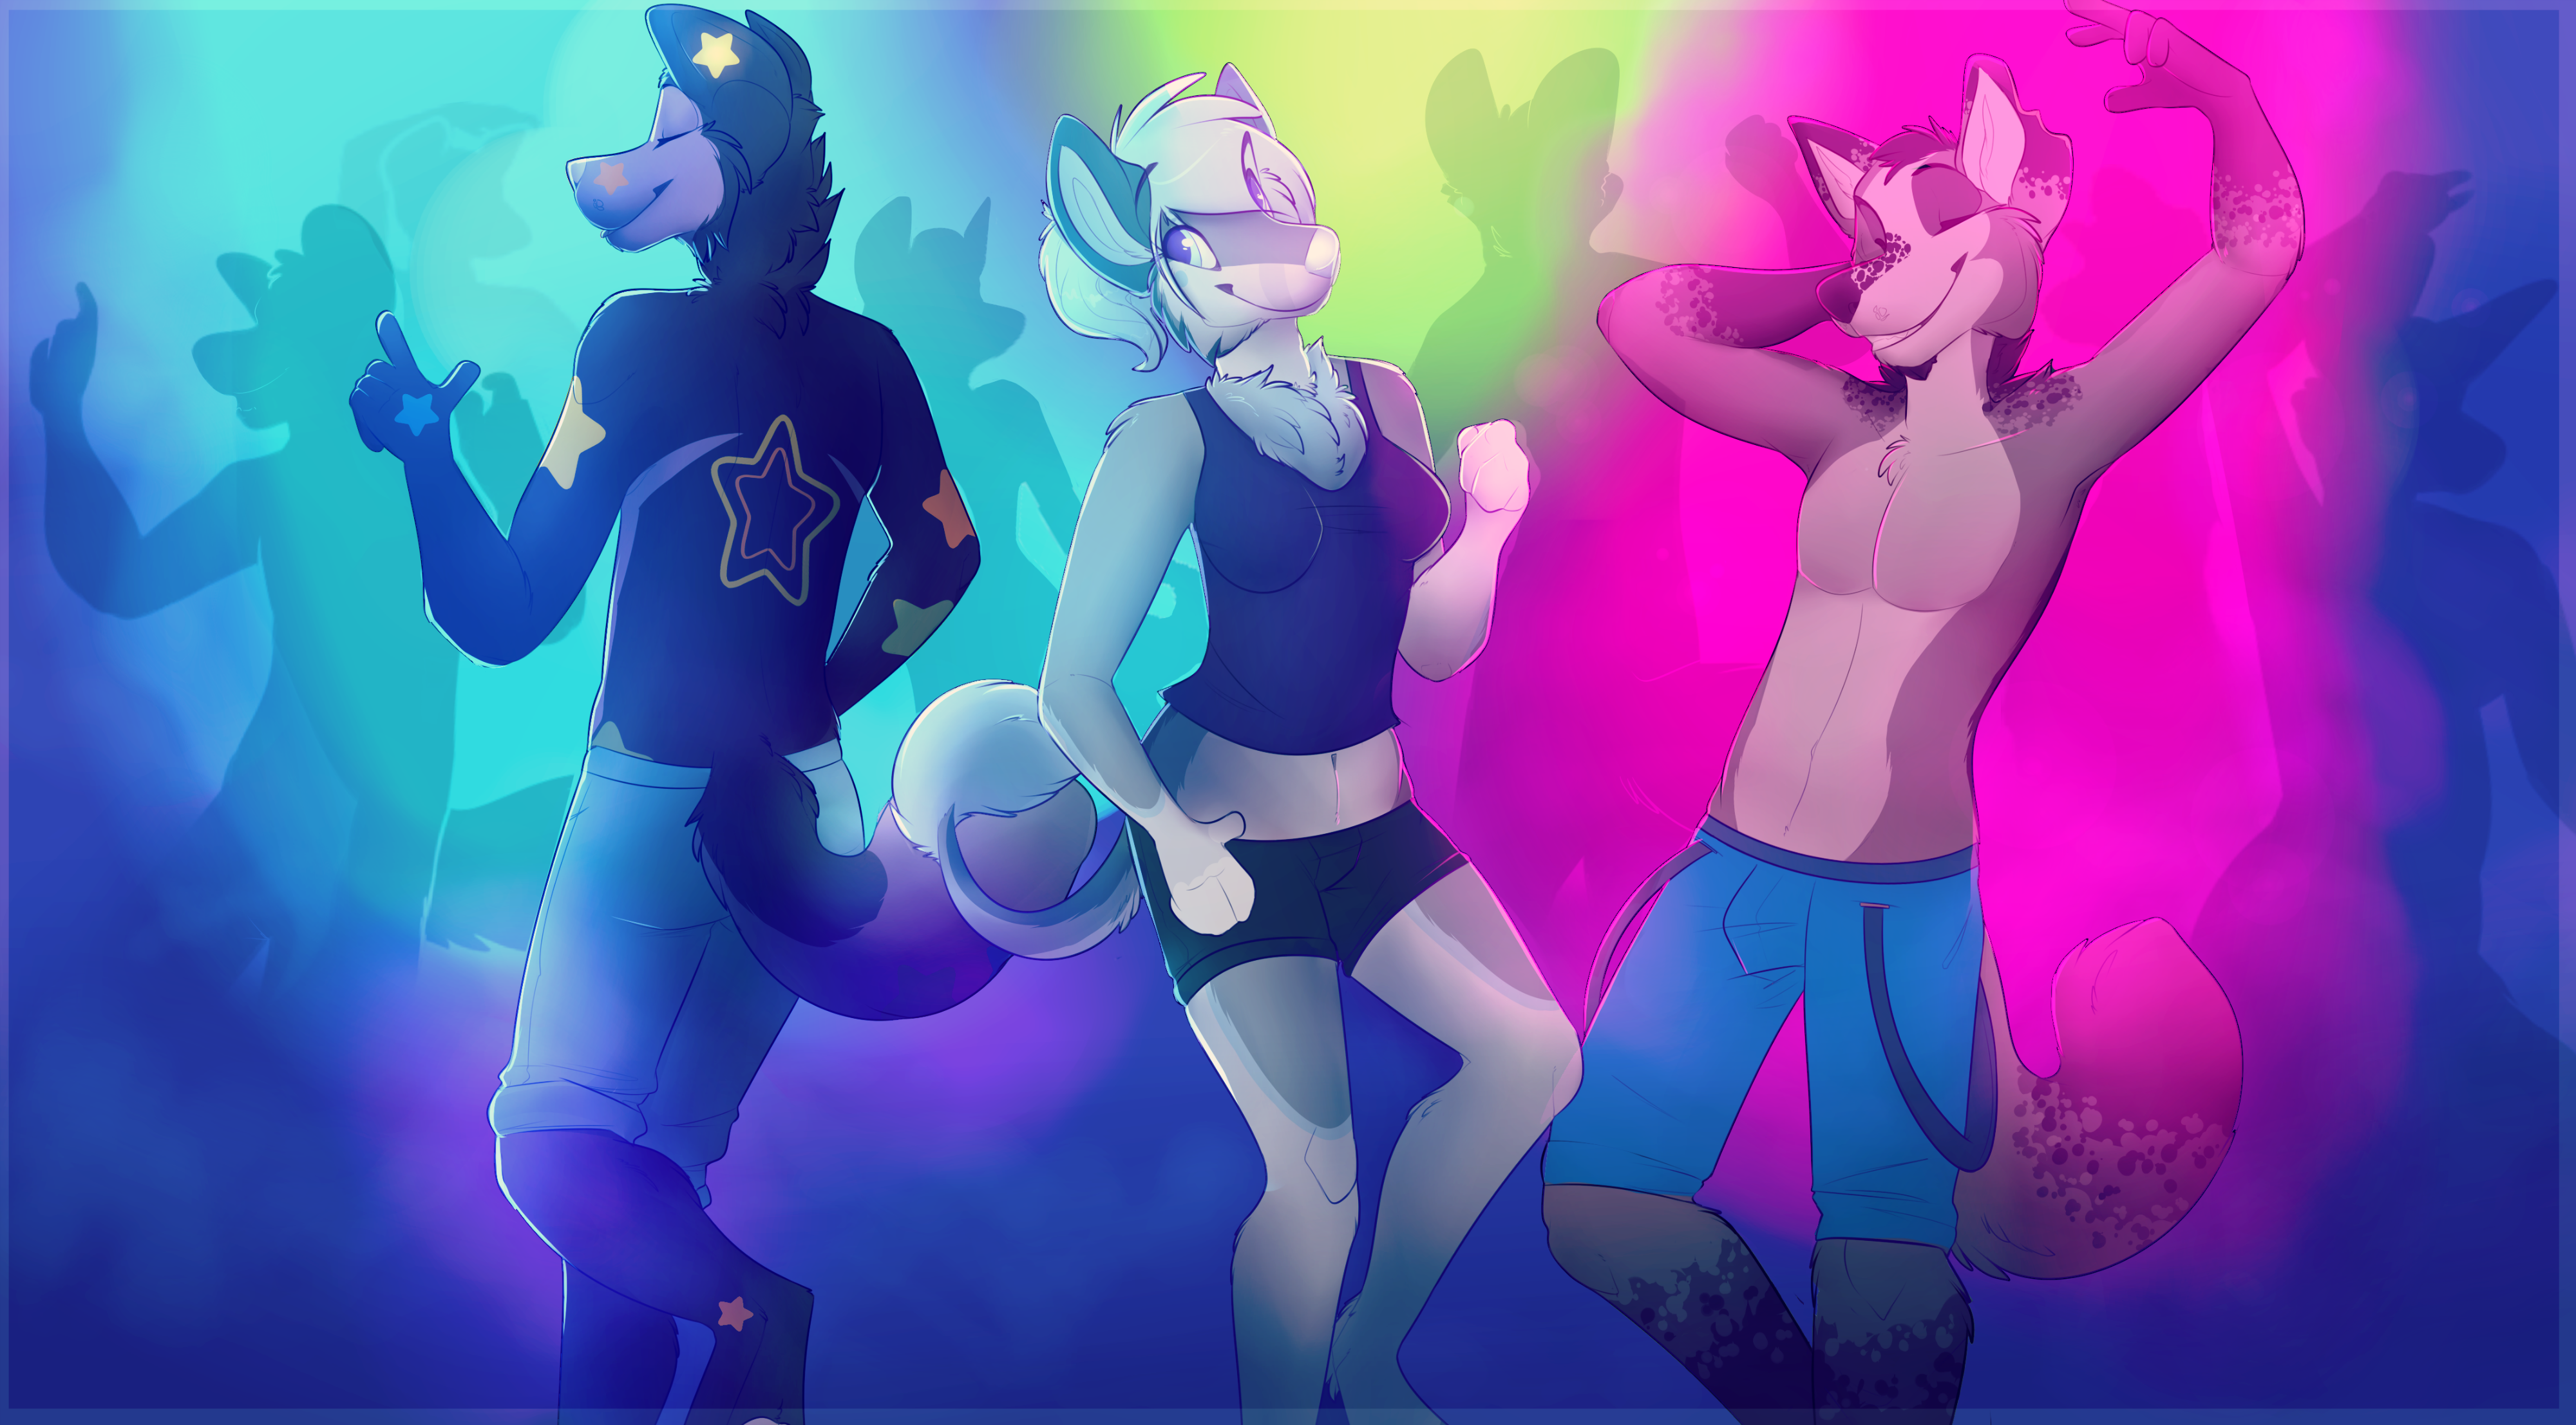 Furry Anthro Clubs Colorful 4000x2213